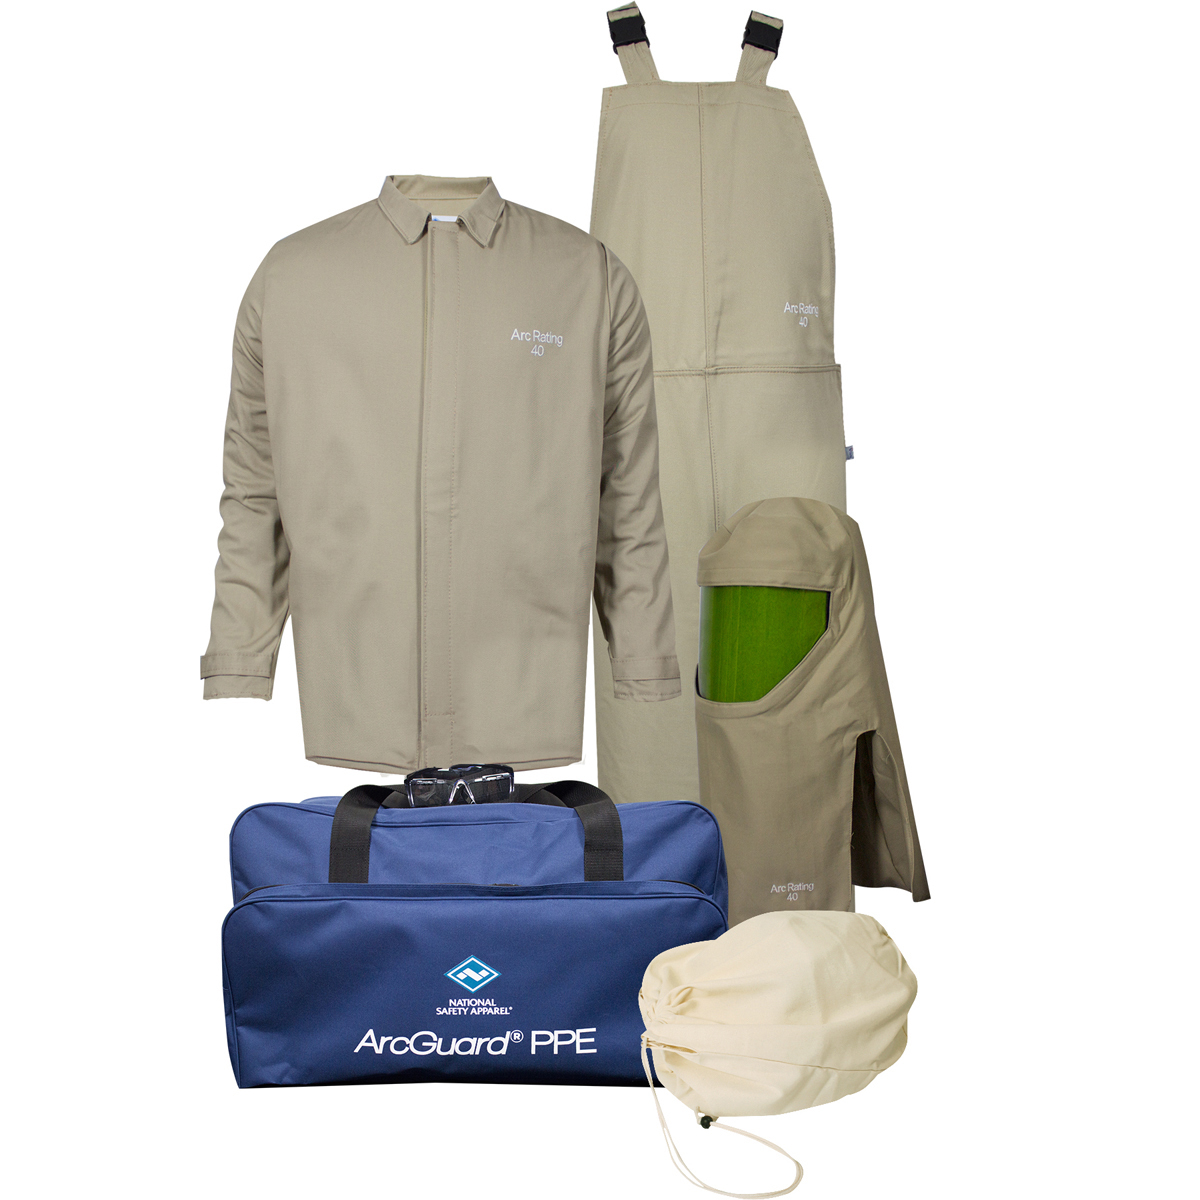 National Safety Apparel 2X Tan FR Cotton/Nylon ArcGuard® Flame Resistant Arc Flash Personal Protective Equipment Kit